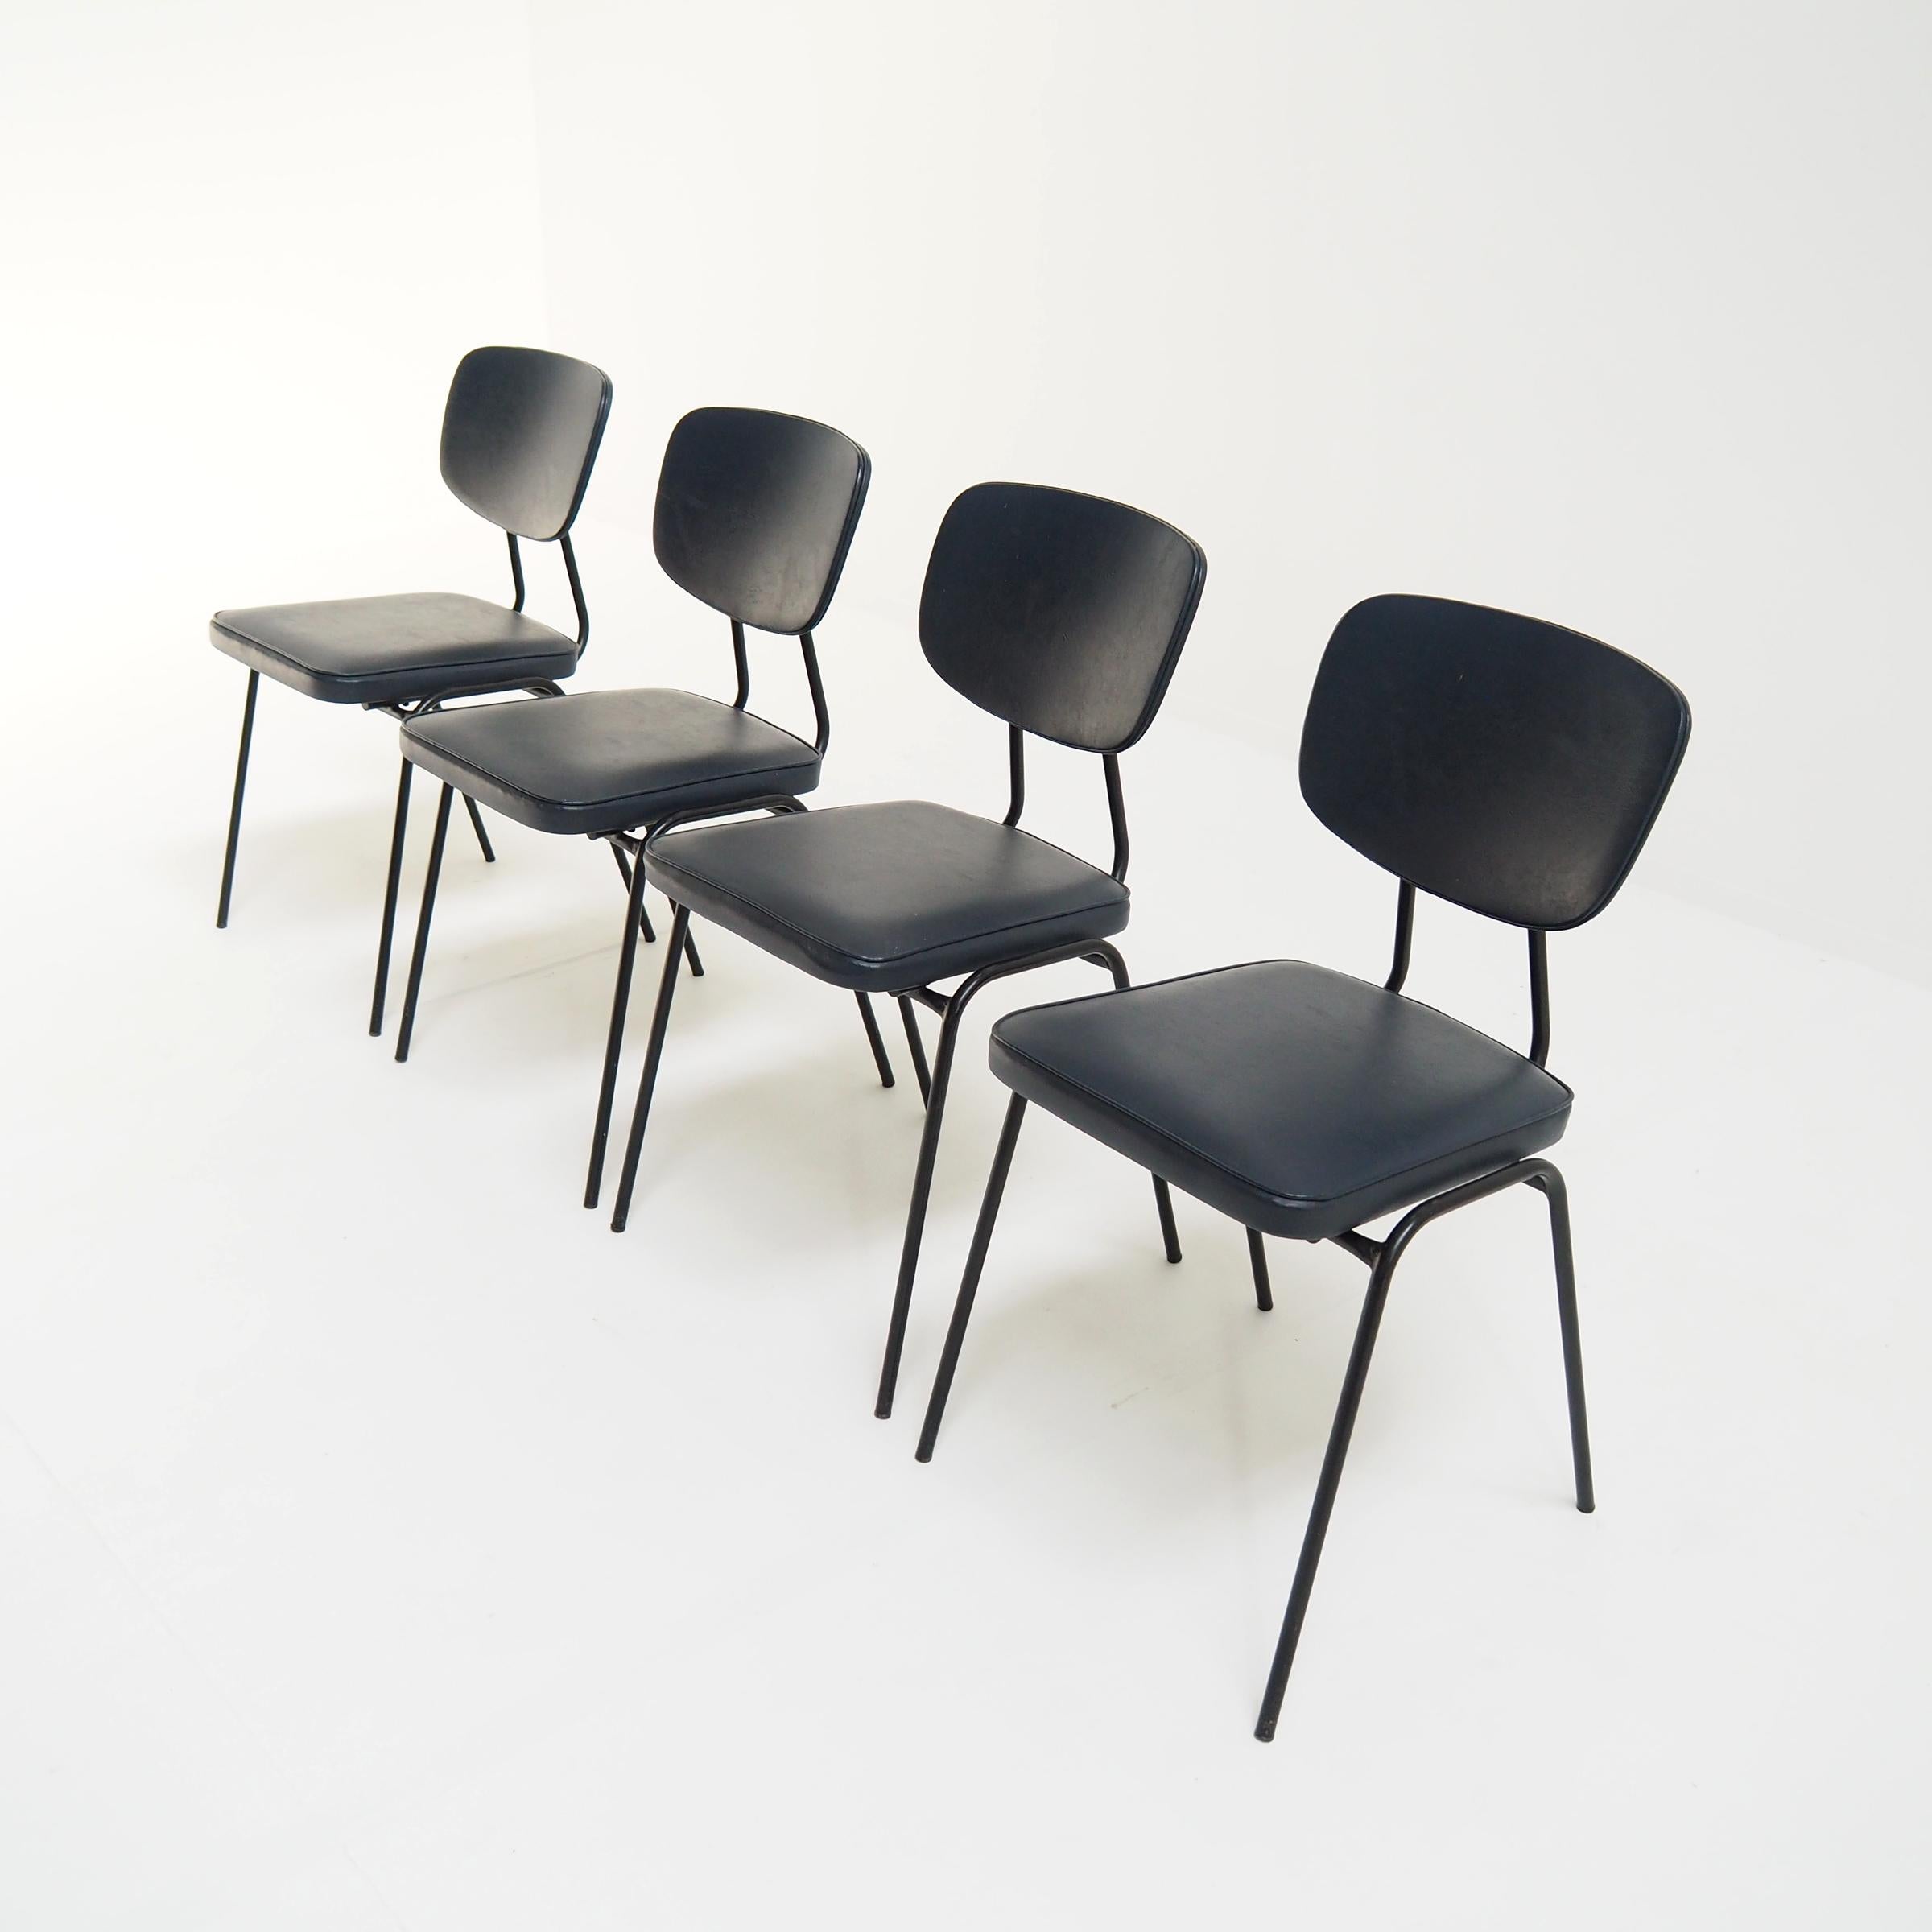 Set of 4 model ‘CM’ chairs designed by Pierre Guariche for Meurop.

The chairs are still in full original, and véry good condition. They only have some signs of wear on the black metal. All seats are equipped with a cushion and their original dark